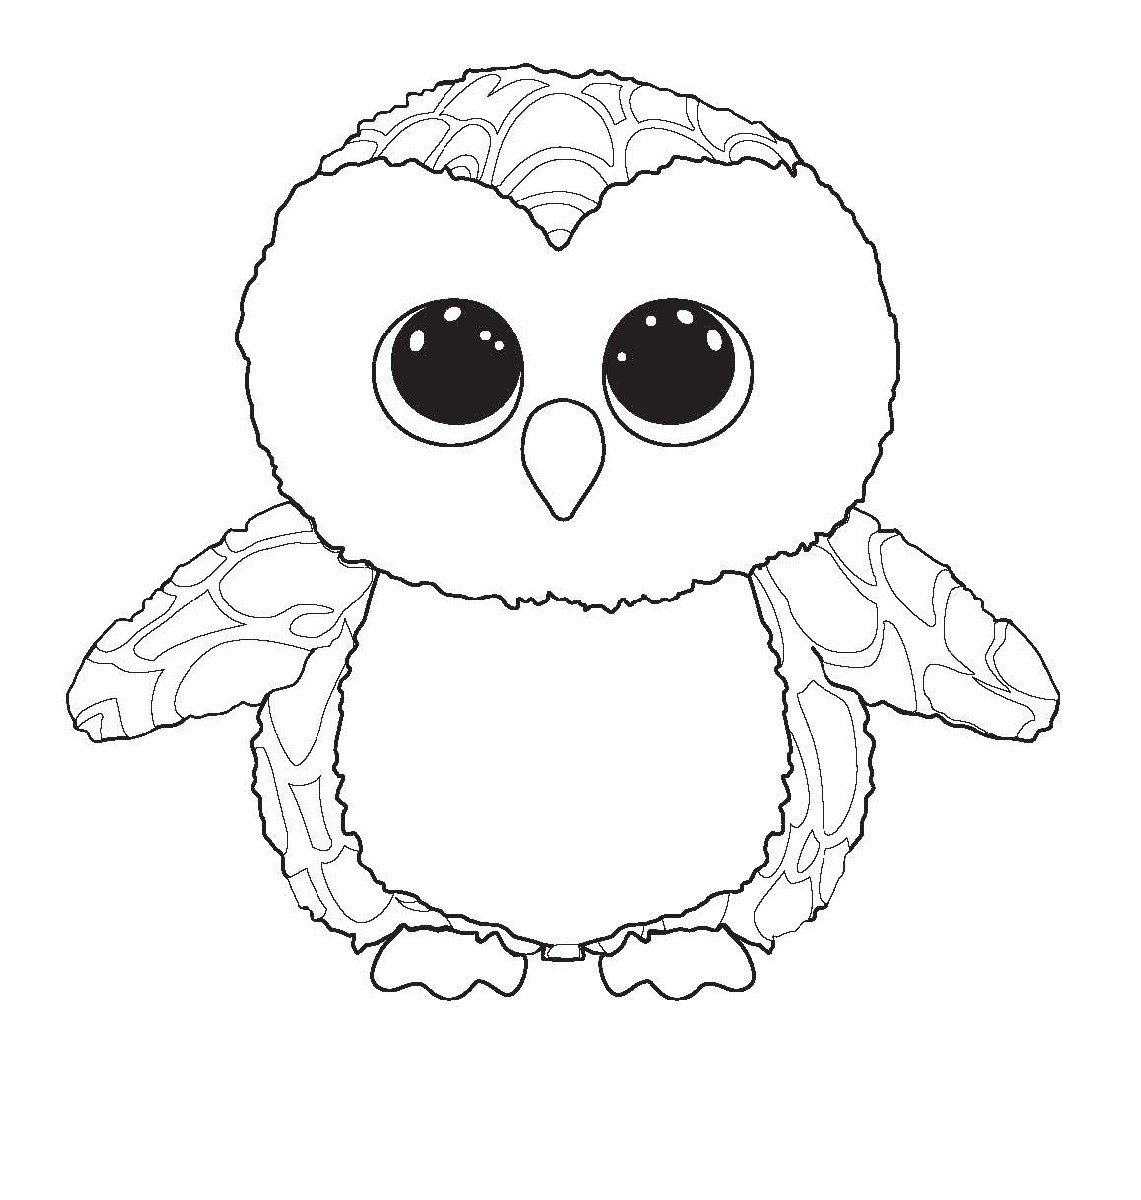 Coloring Book : Beanie Boos Coloring Pages Photo Album ...